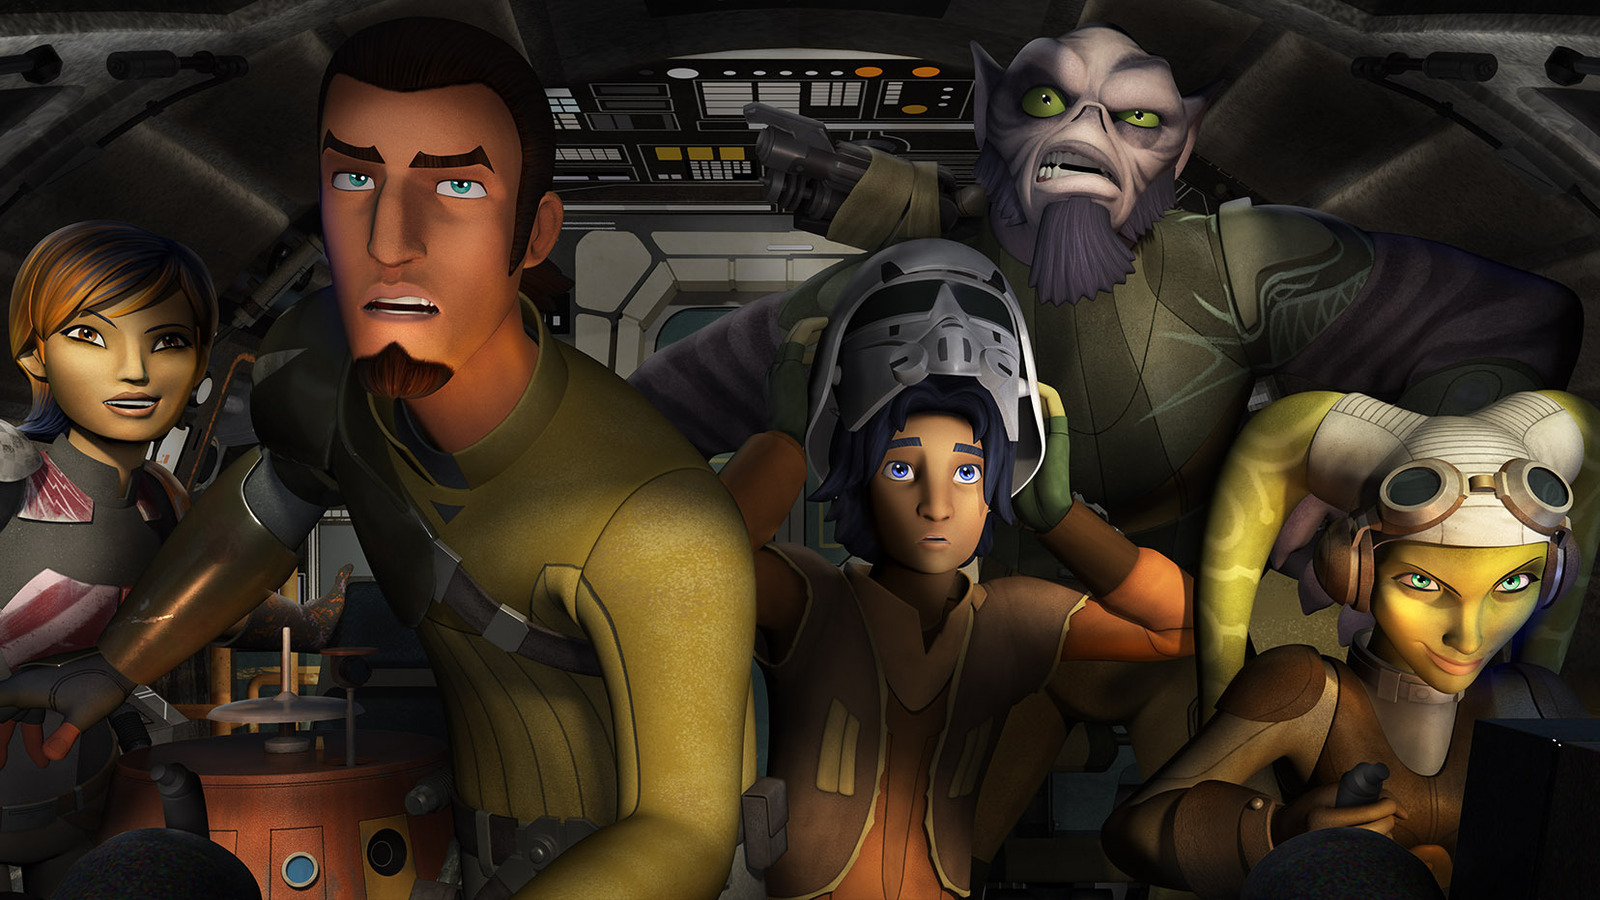 How Andor Could Tie Directly Into Star Wars Rebels